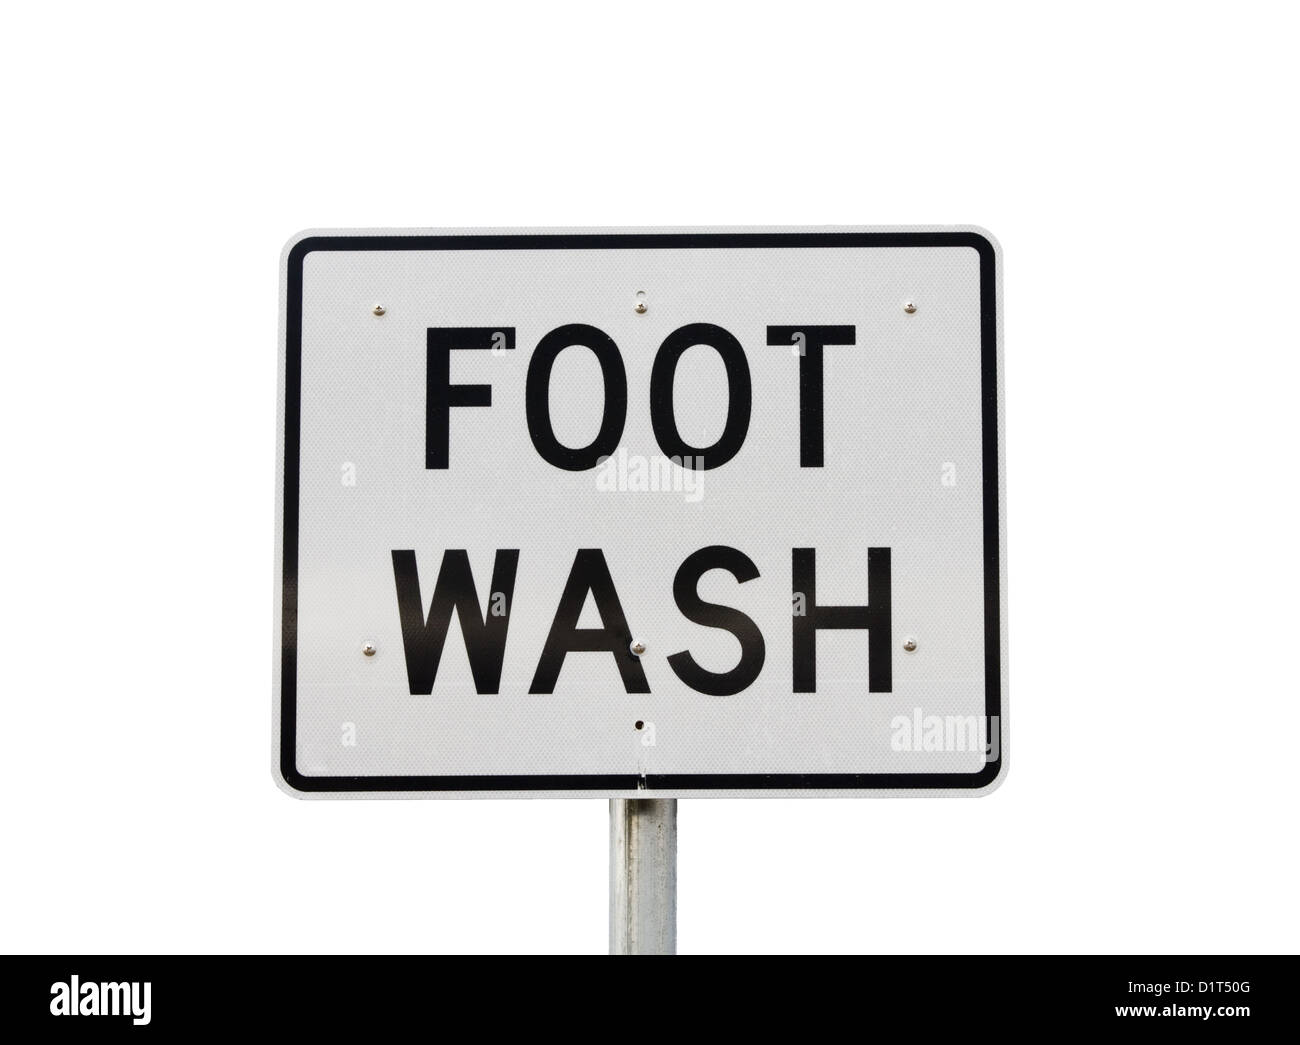 large reflective road sign style foot wash sign isolated on white Stock Photo